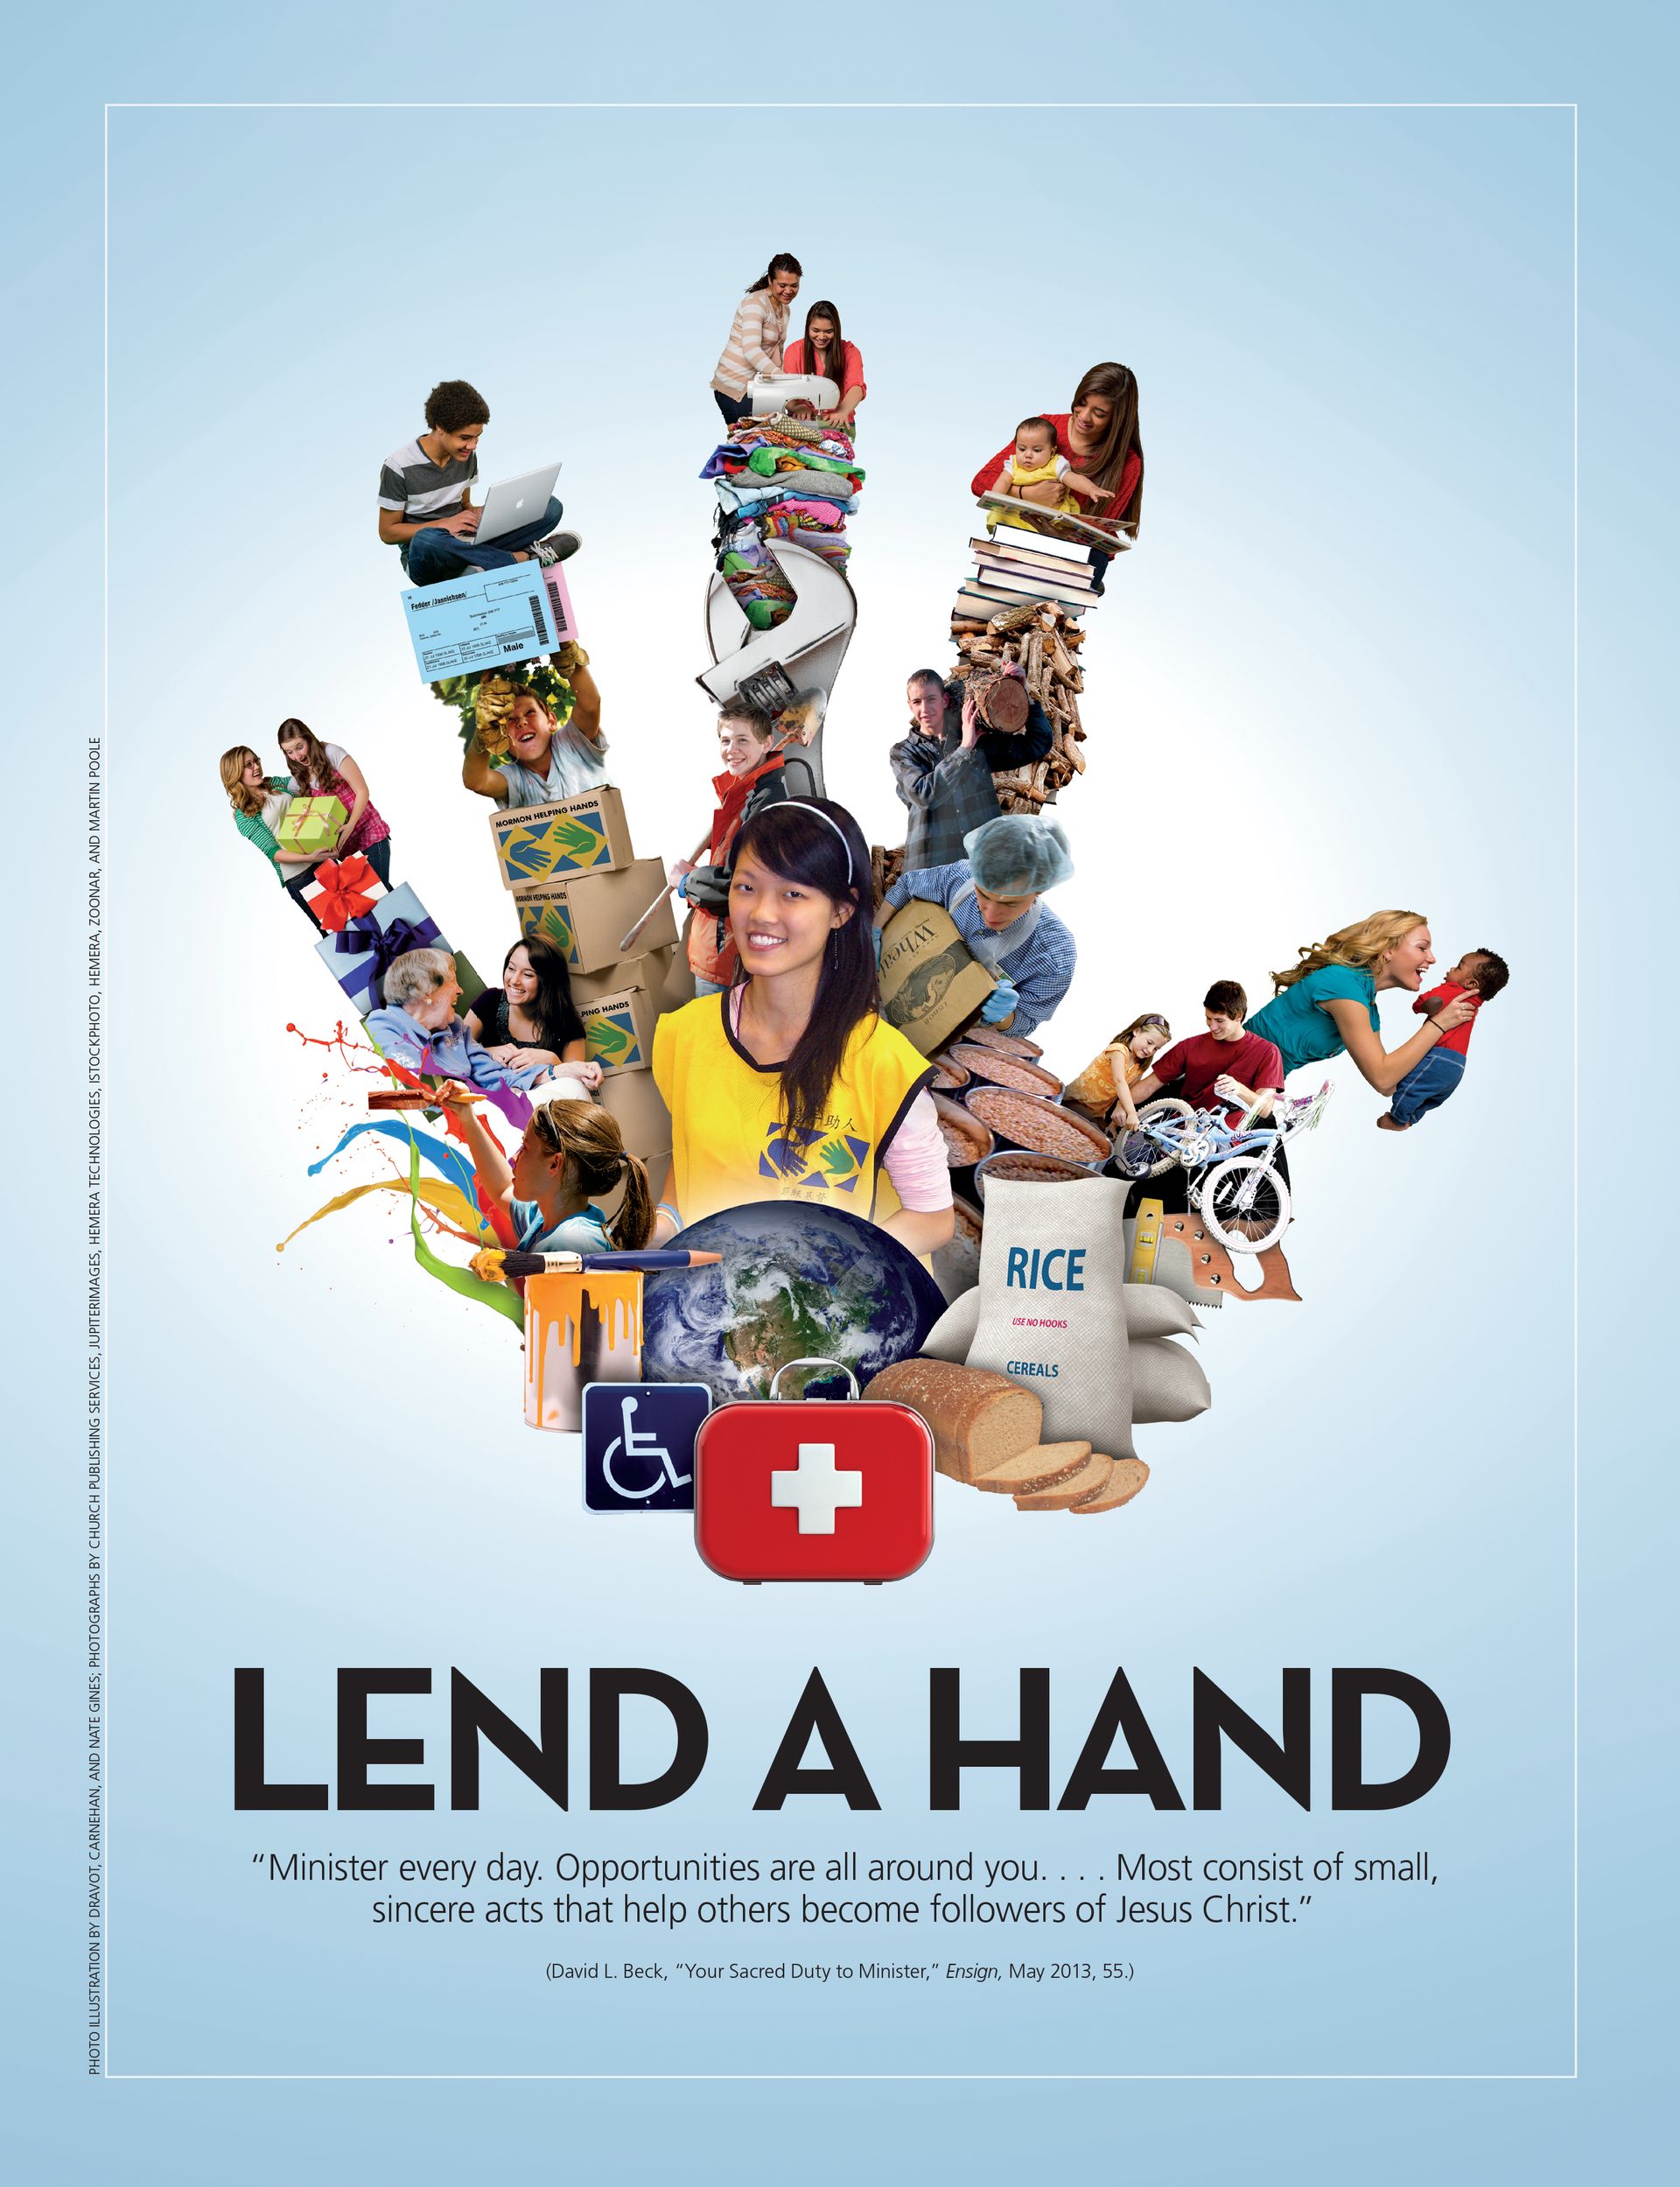 Lend a Hand. “Minister every day. Opportunities are all around you. … Most consist of small, sincere acts that help others become followers of Jesus Christ.” (David L. Beck, “Your Sacred Duty to Minister,” Ensign, May 2013, 55.) Aug. 2013 © undefined ipCode 1.